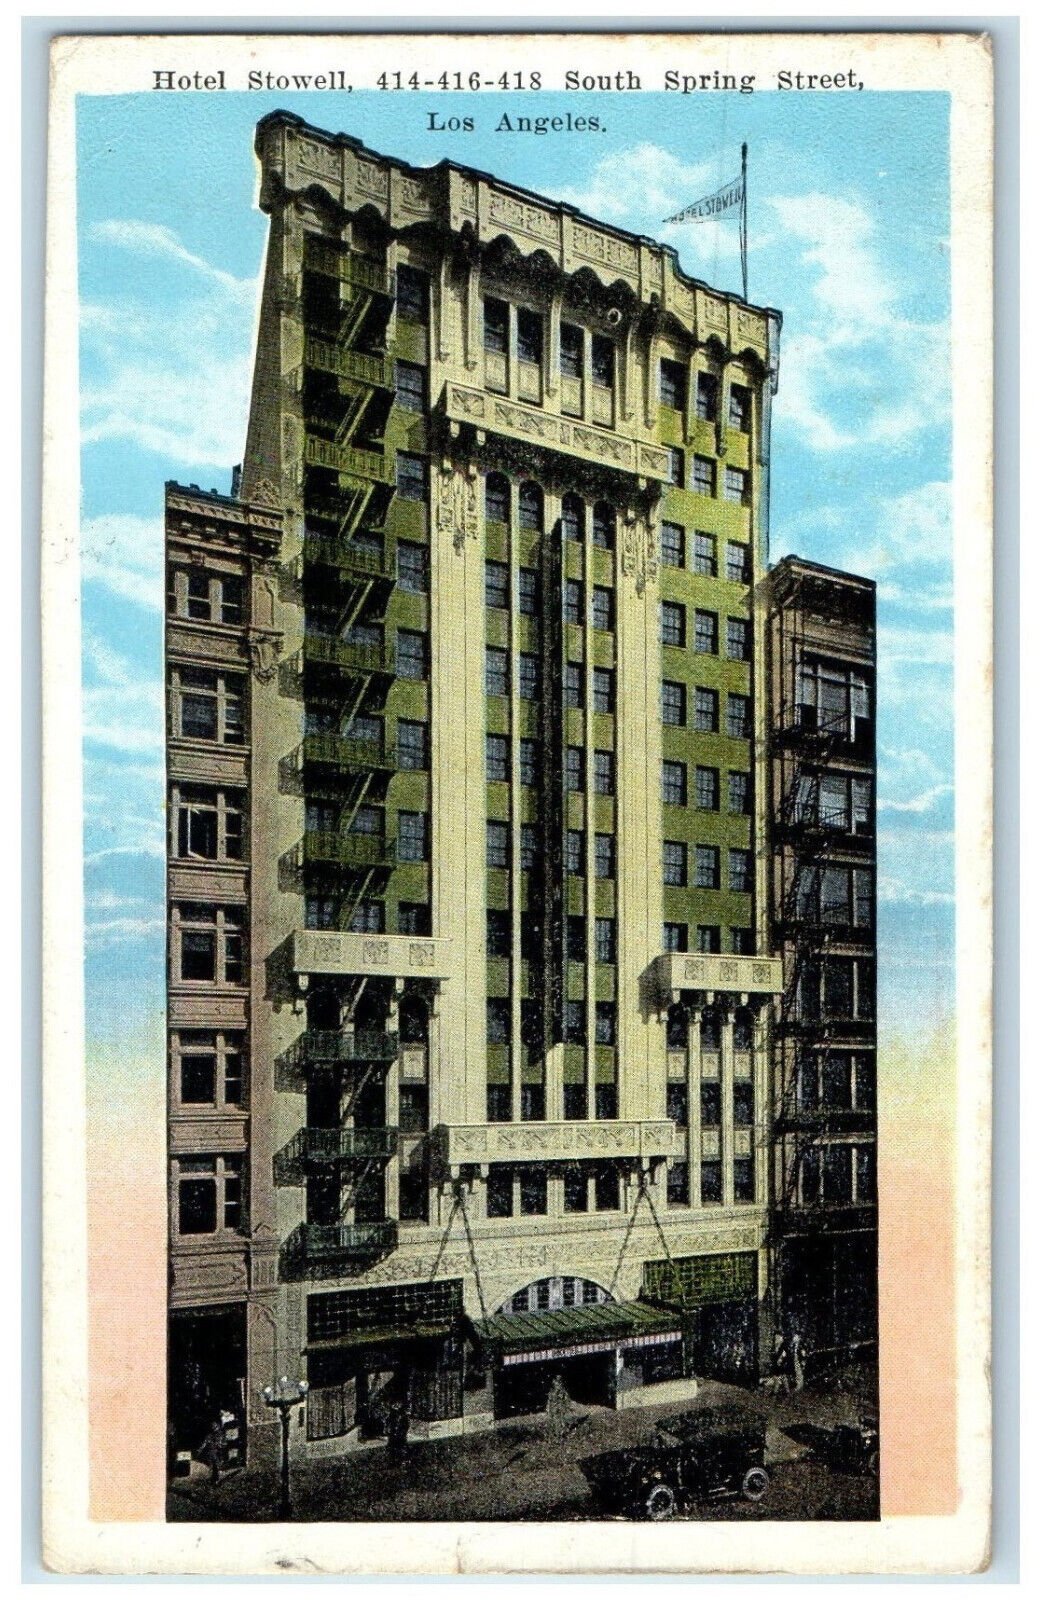 1923 Hotel Stowell South Spring Street Los Angeles California CA Postcard